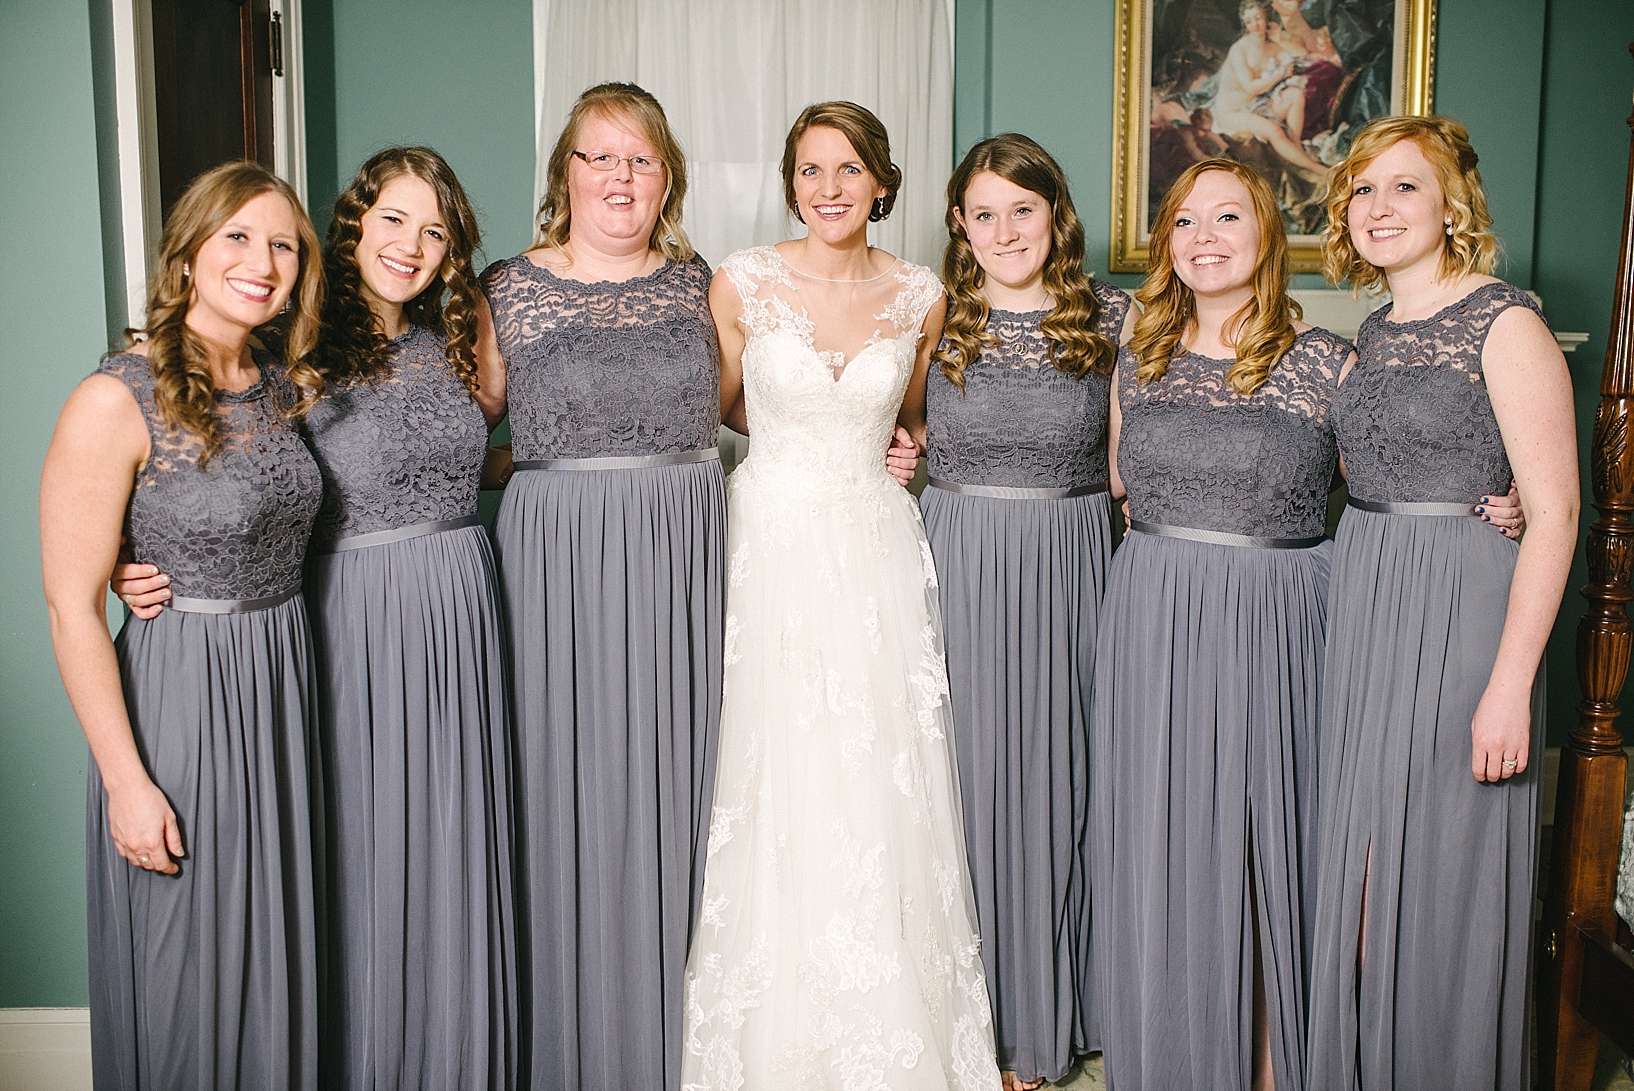 bride and bridesmaids in gray lace dresses standing together